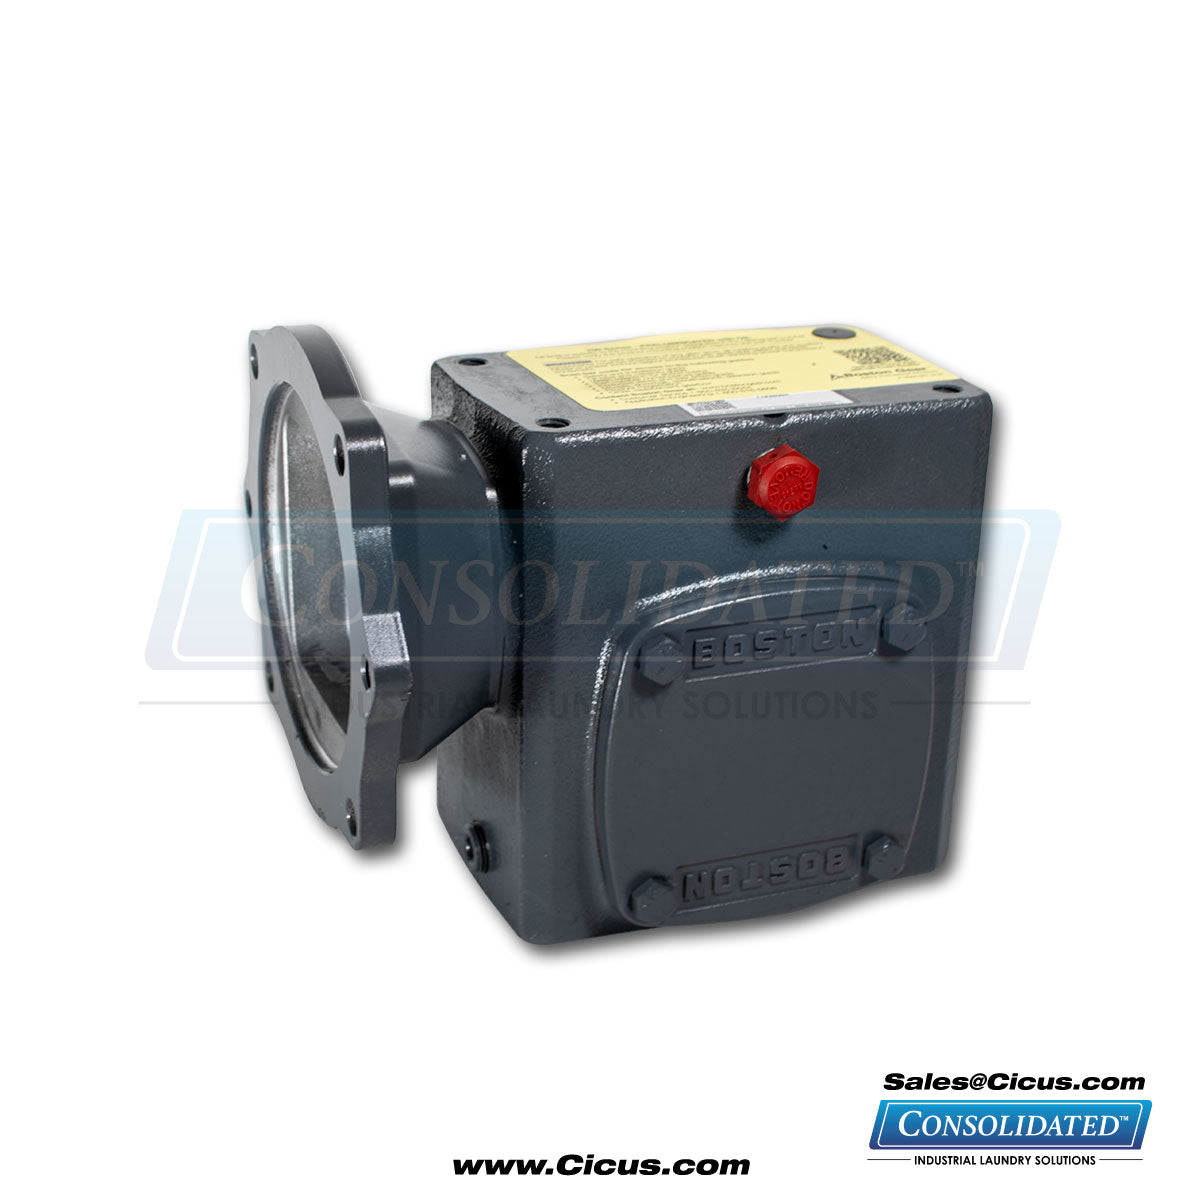 Drive Pulley Assembly Roach Convey [8DB-39-08] - Side View